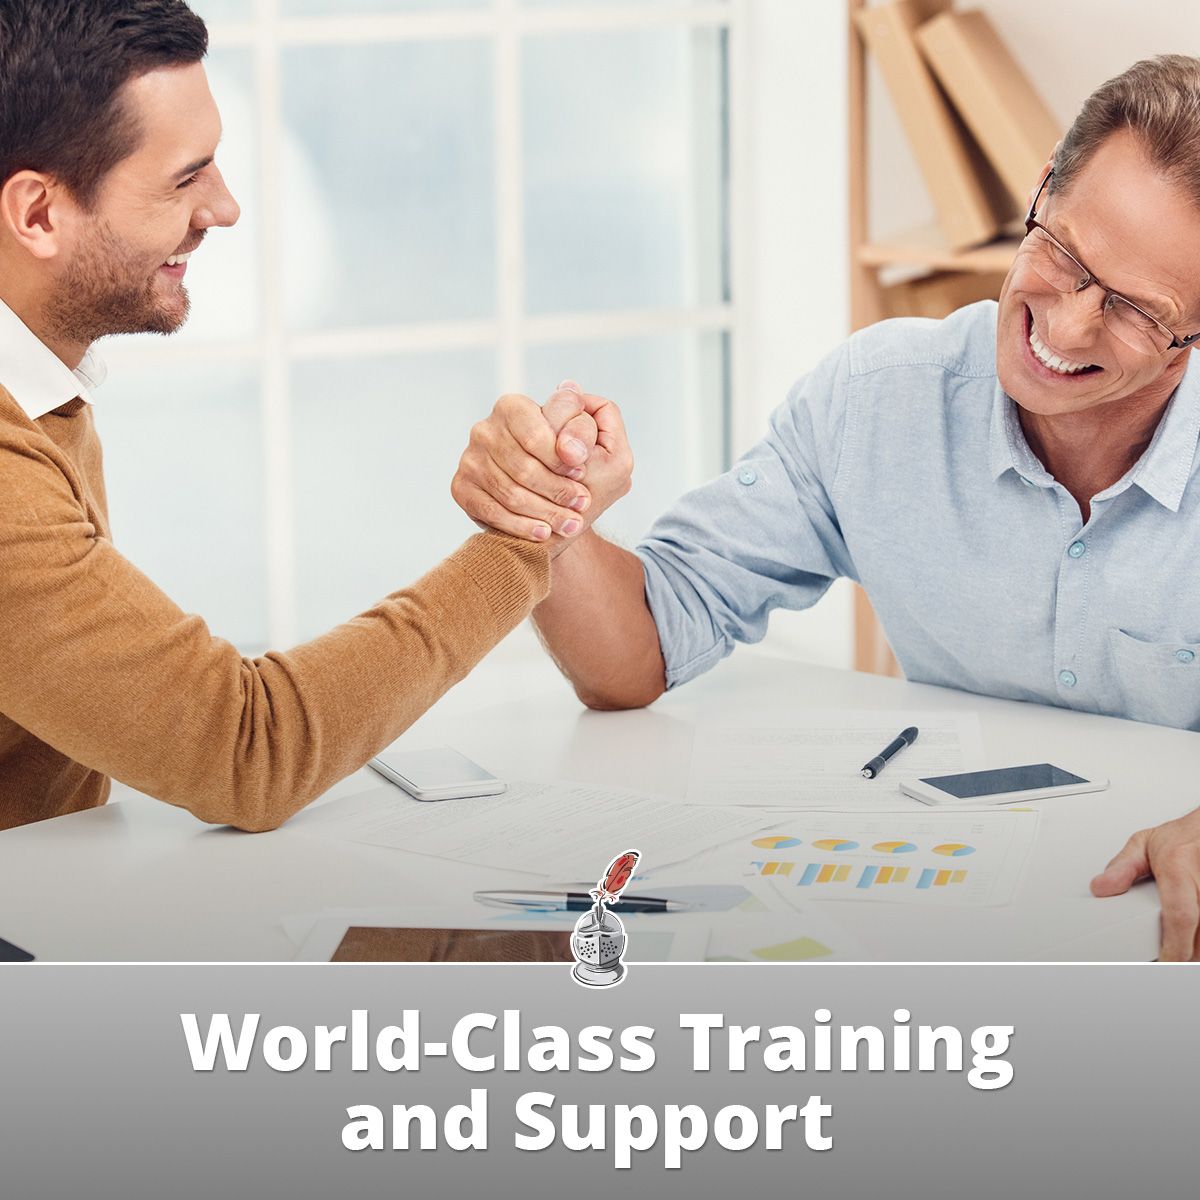 World-Class Training and Support